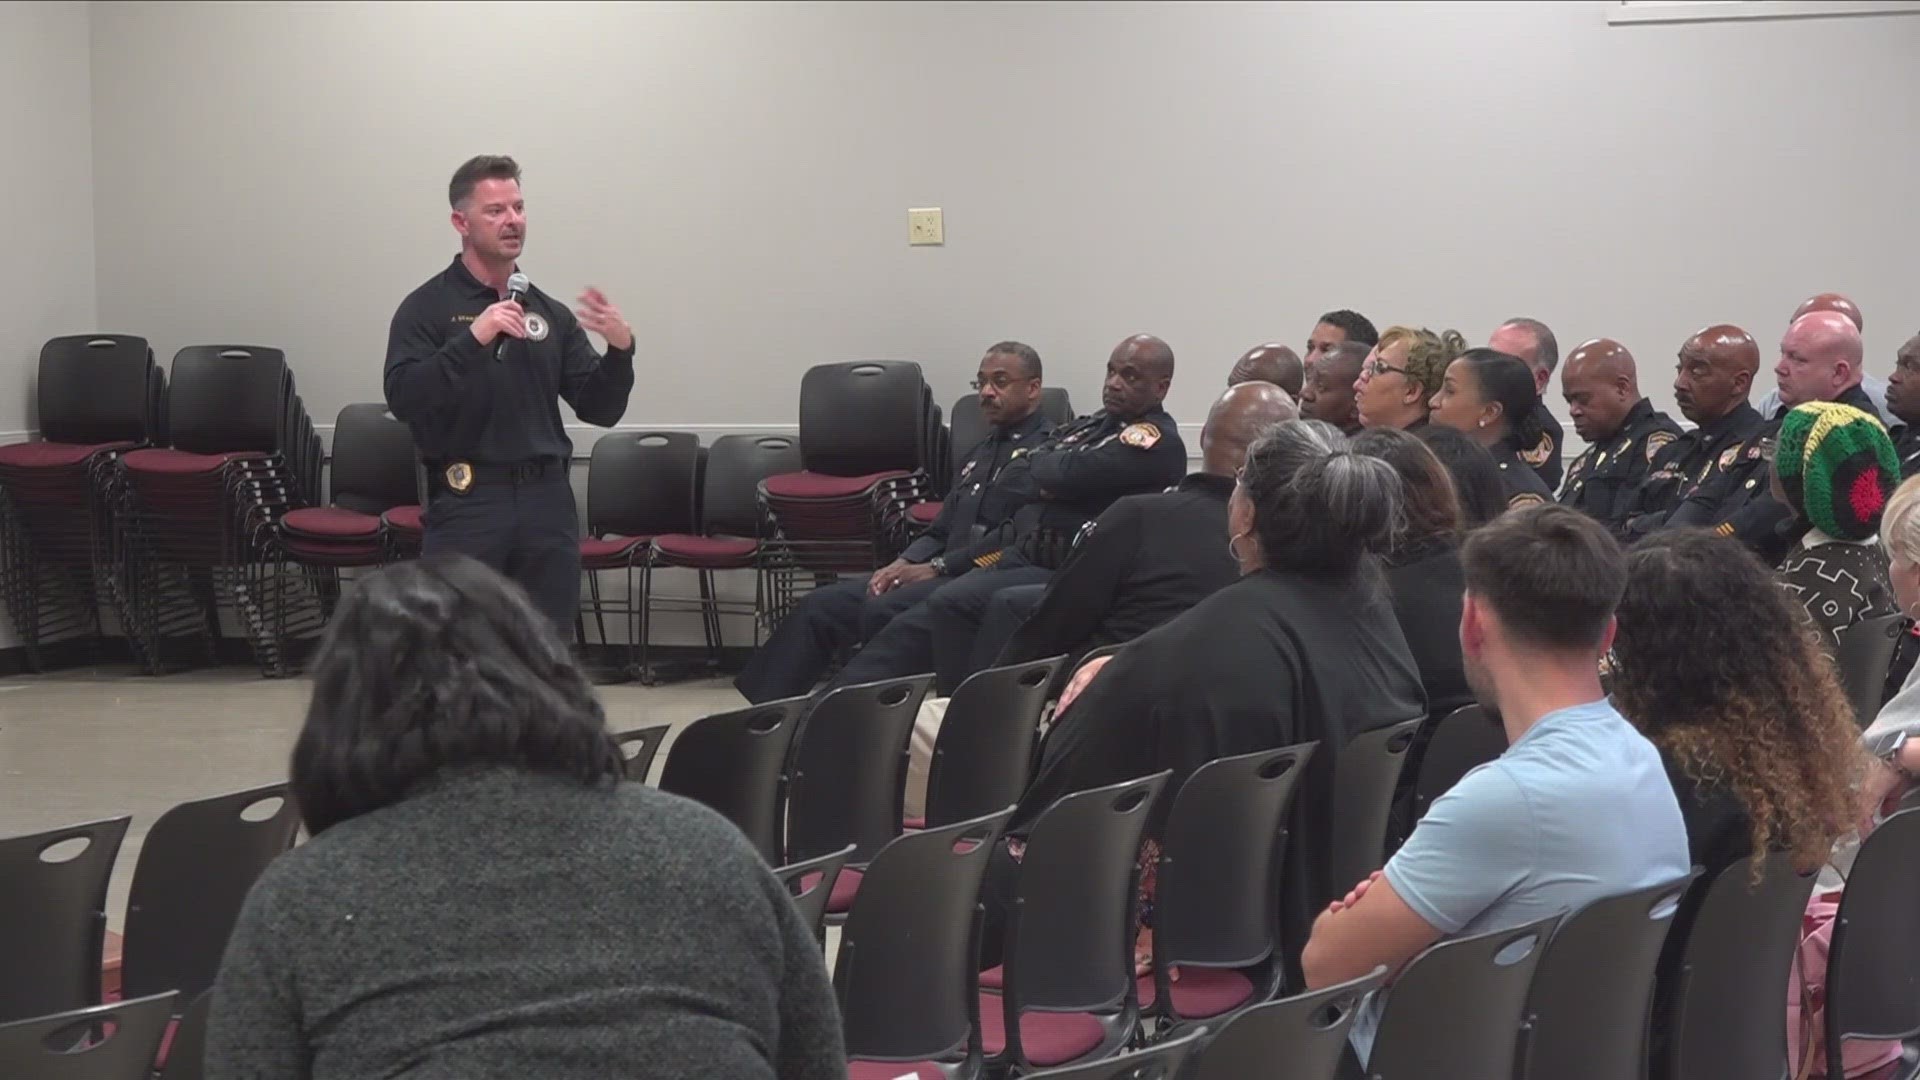 The Memphis Police Department (MPD) is trying new tactics to hear community perspectives on how to slow crime and respond to incidents better.